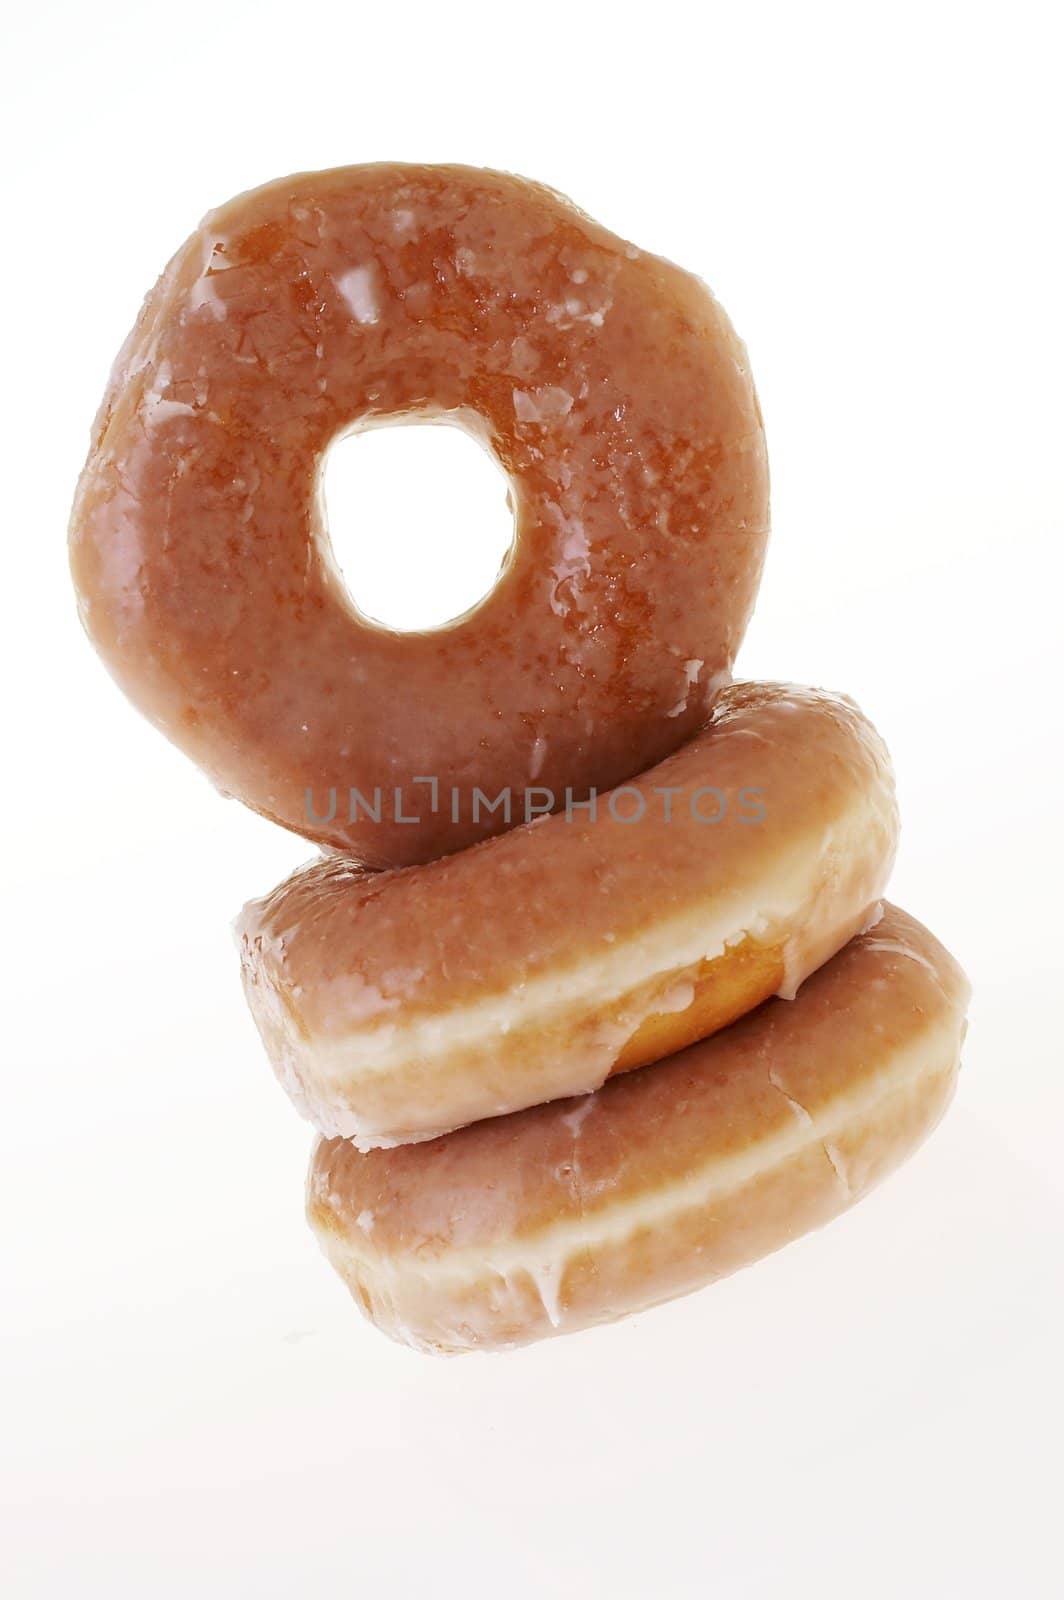 a picture of three glazed donuts